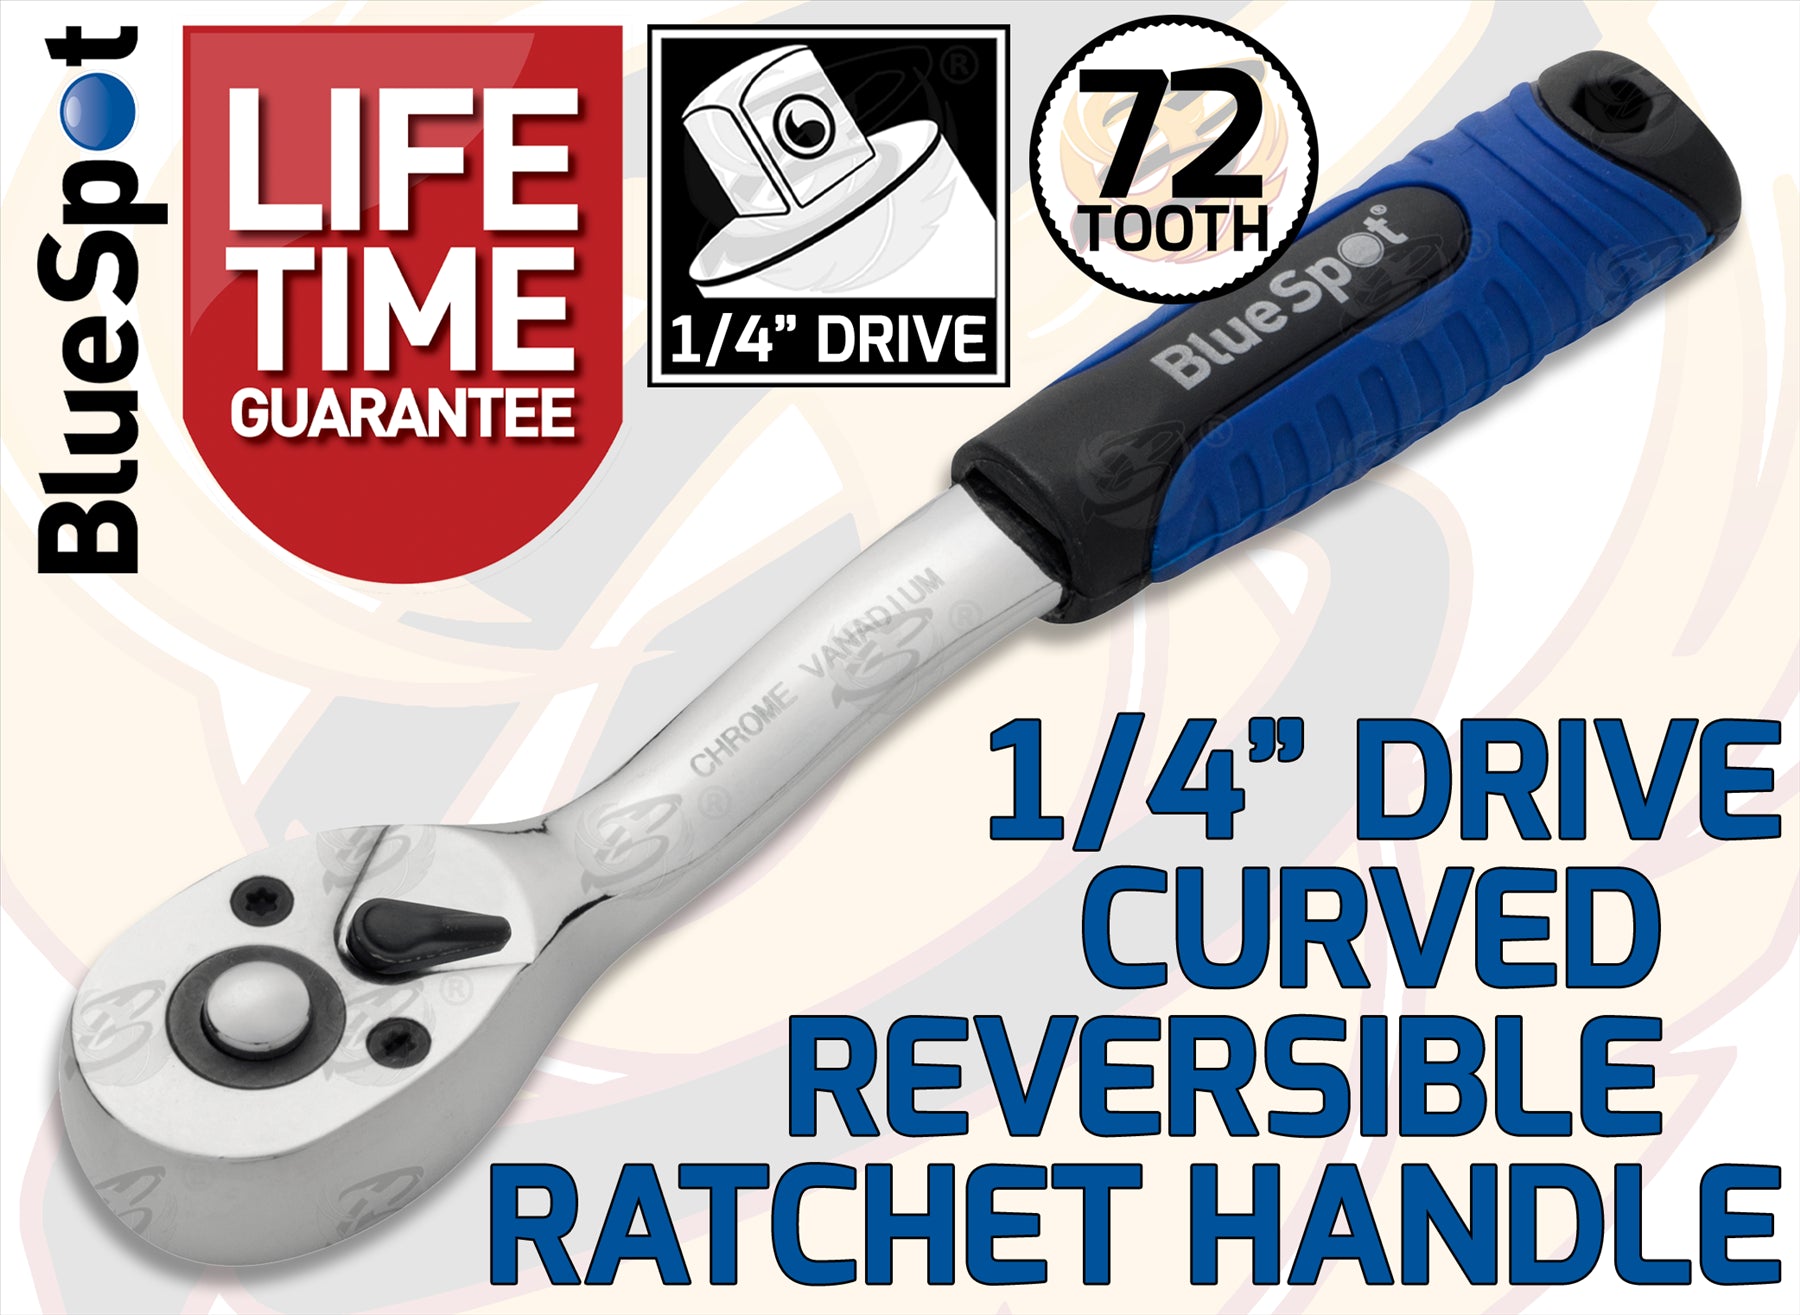 BLUESPOT 1/4" DRIVE 72 TOOTH SOFT GRIP CURVED RATCHET HANDLE